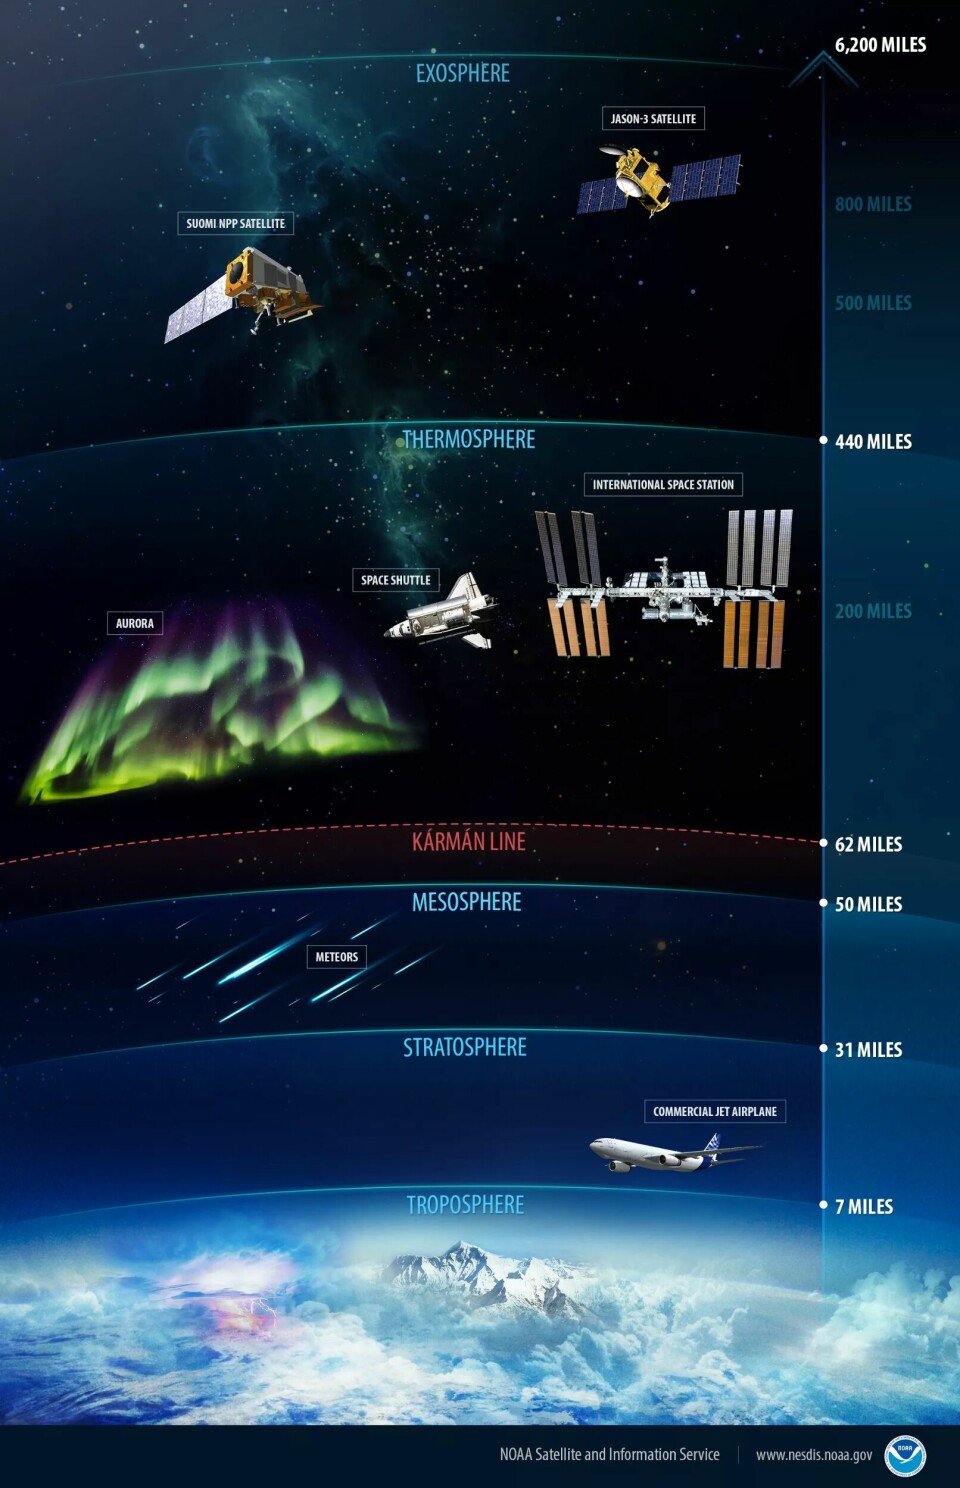 In the diagram you see the different layers of the atmosphere.  Note that it continues over the space station.